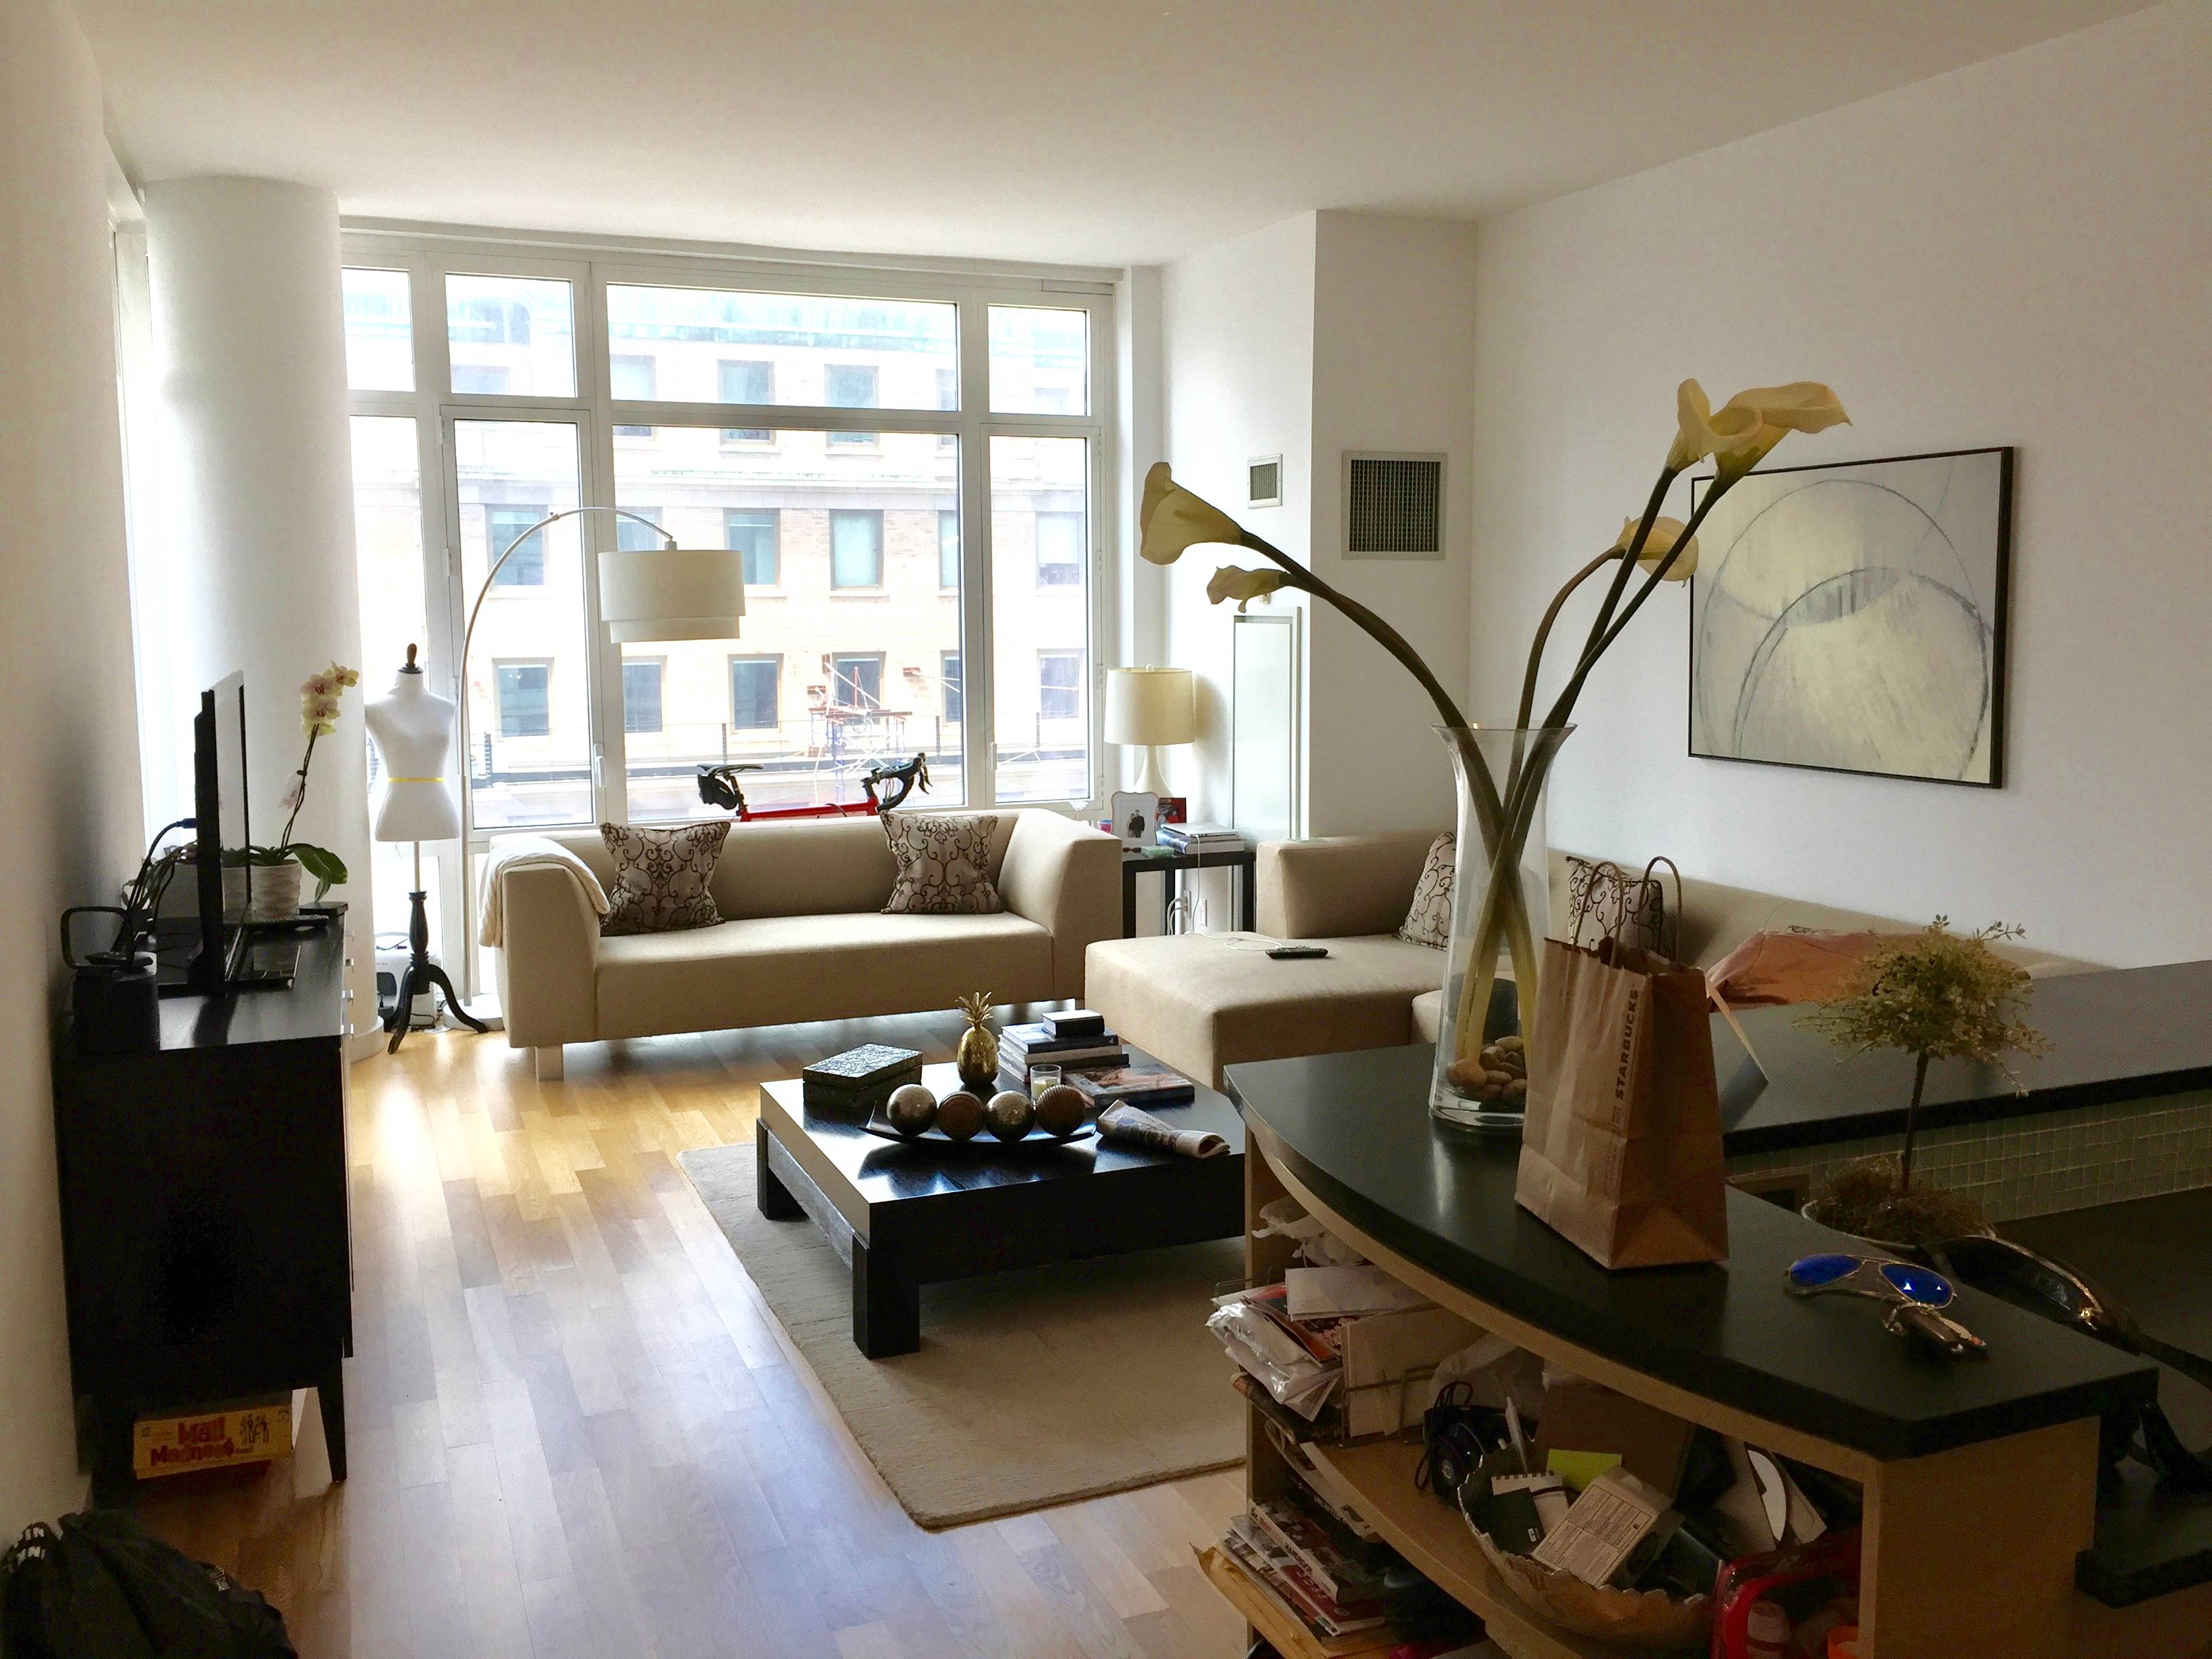 NEW TO MARKET - RENTAL @BEAUTIFUL & LUXURIOUS 325 FIFTH AVENUE - 2 BEDROOM, 2 BATH #19A - $6,800. per month - minimum Lease Term 1 year